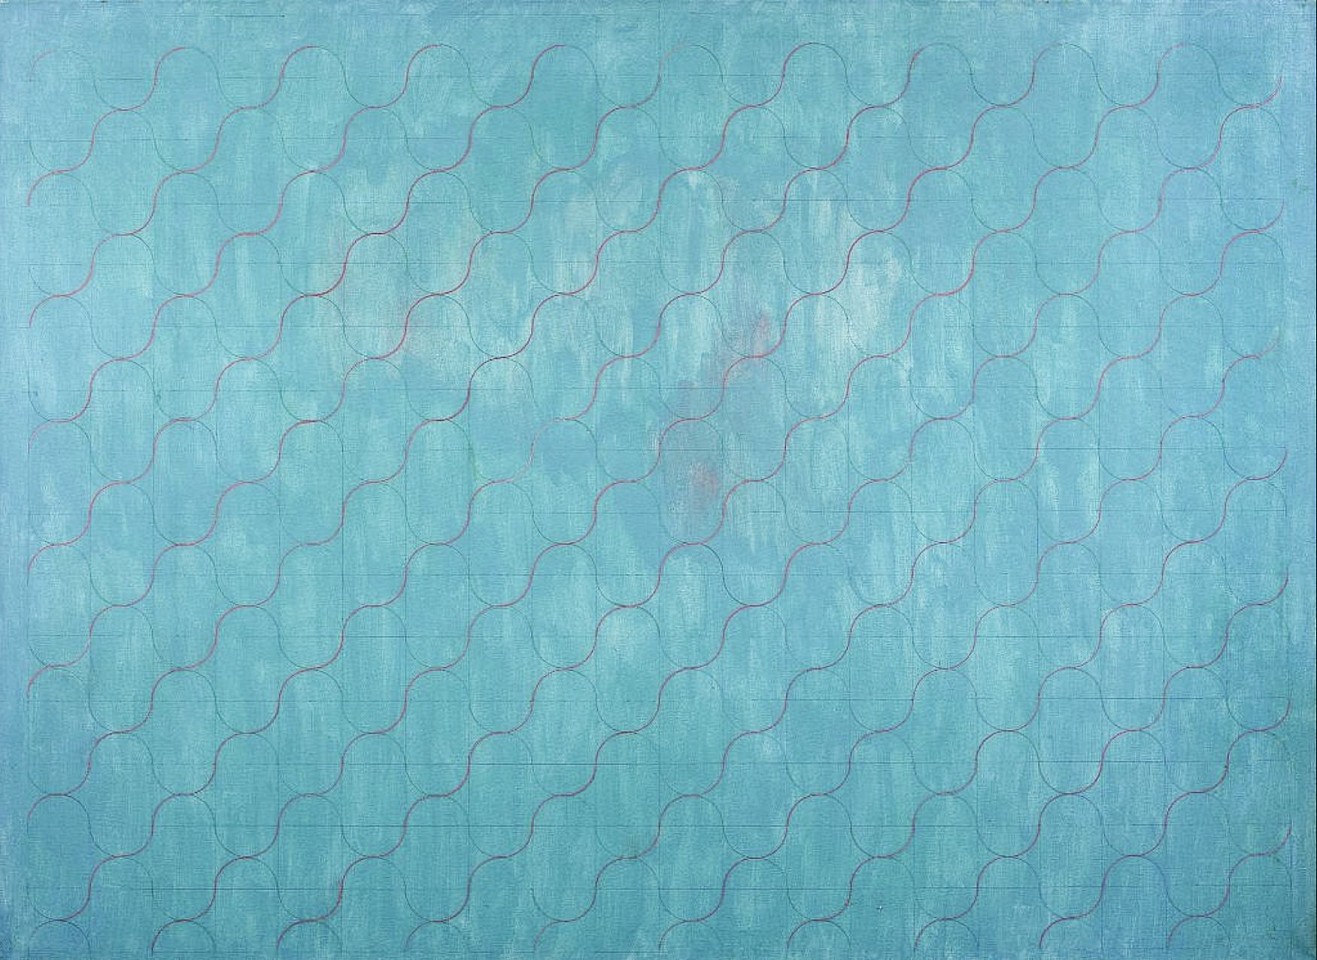 Perle Fine, A Criss Cross of Currents #1 | SOLD, c. 1970
Oil on canvas, 54 x 74 in. (137.2 x 188 cm)
© A.E. Artworks LLC
FIN-00024